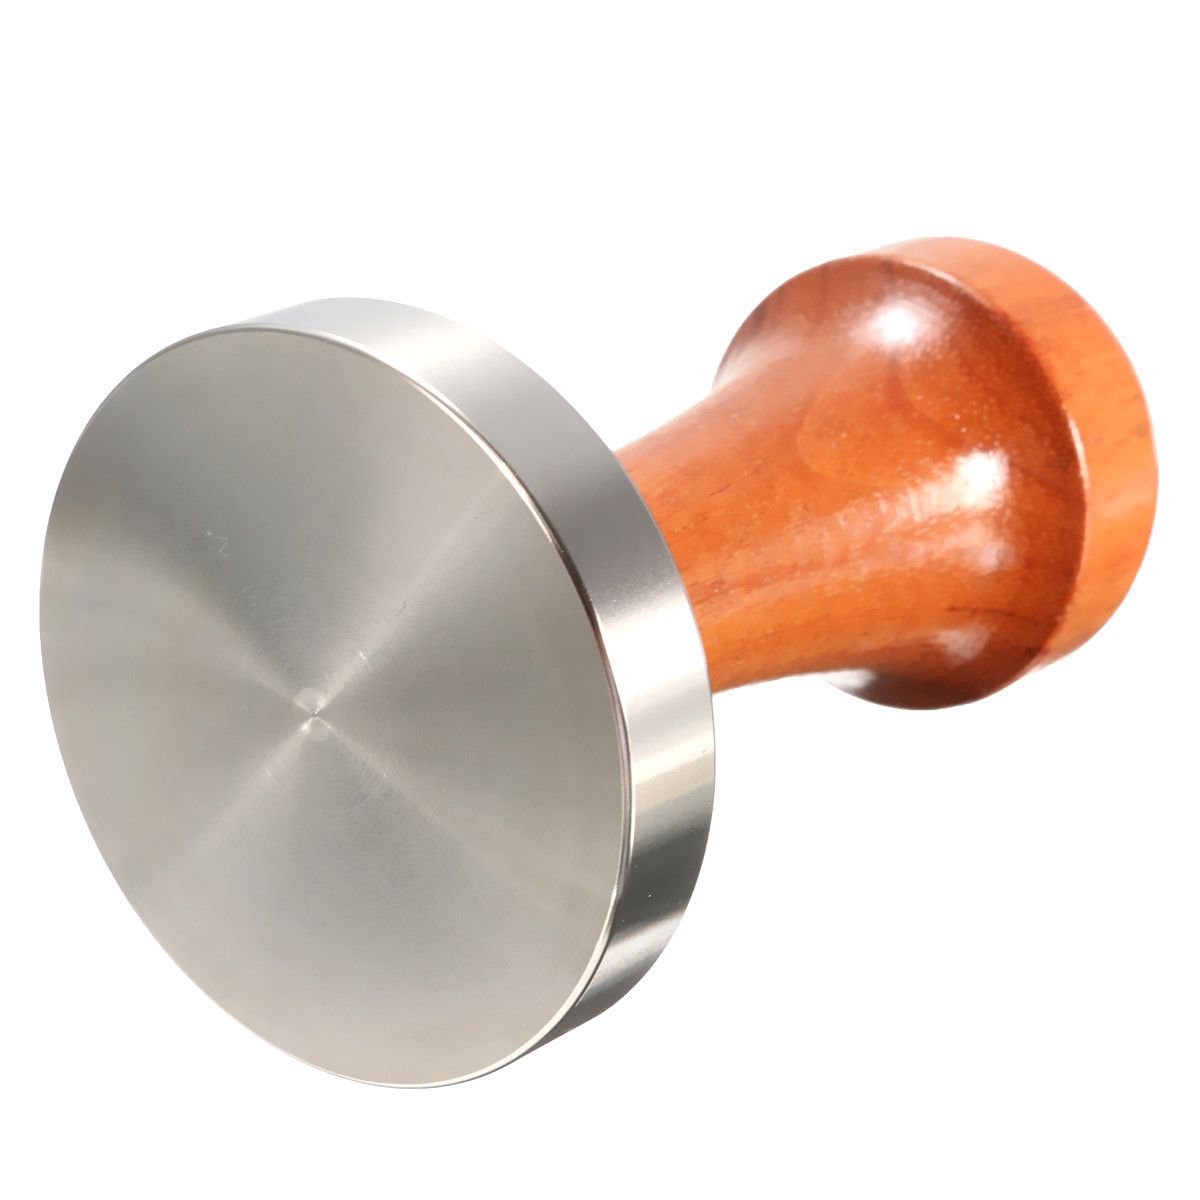 53mm-Stainless-Steel-Cafe-Coffee-Tamper-Bean-Press-for-Espresso-Flat-Base-Wooden-Handle-1170307